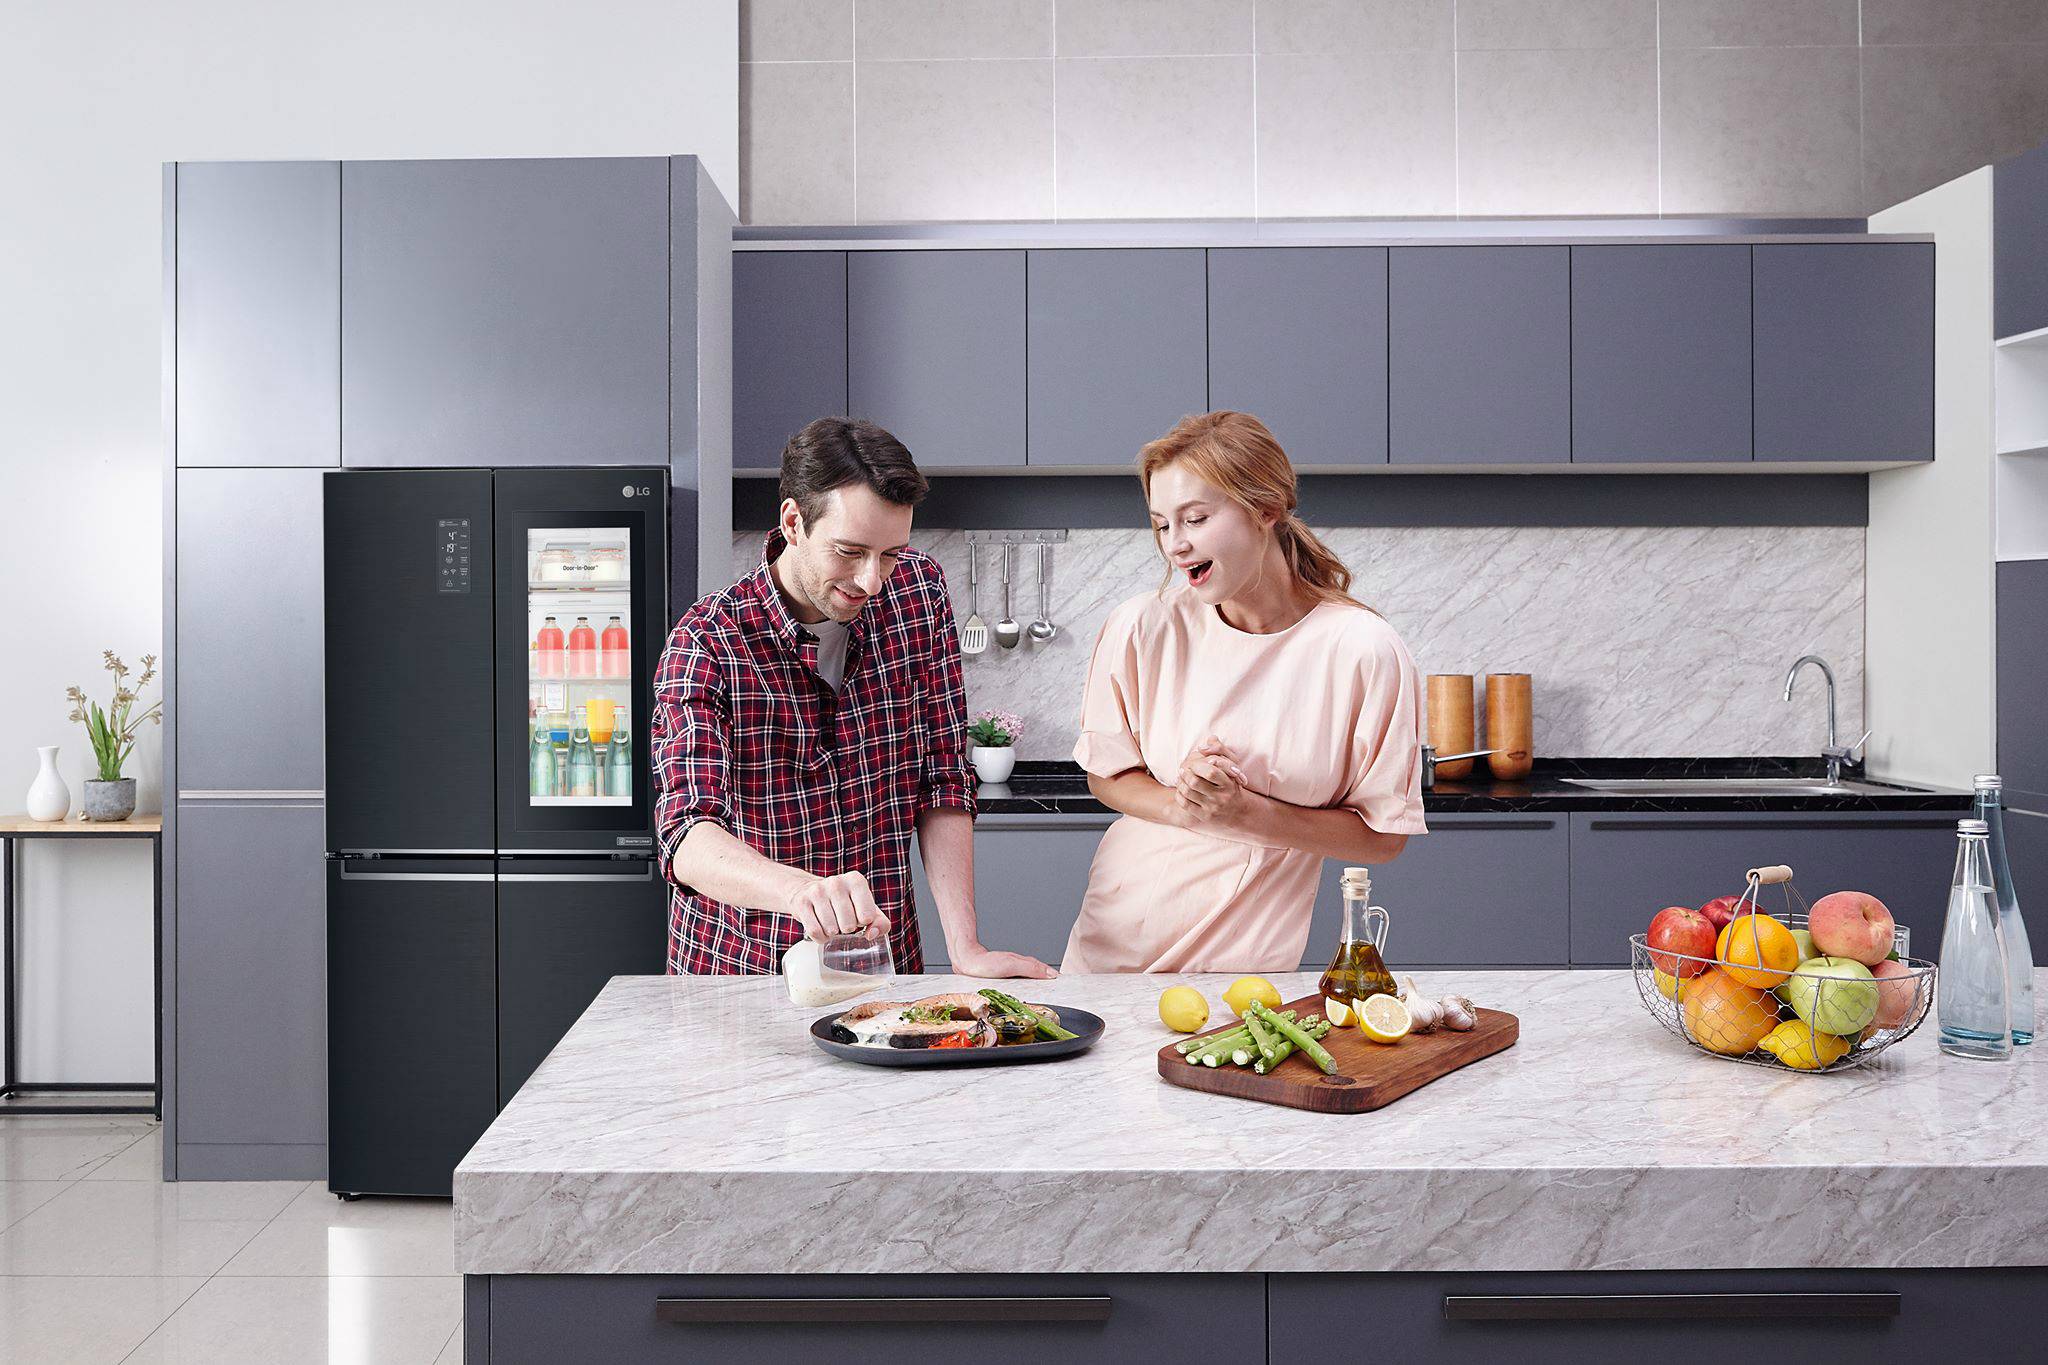 LG InstaView ThinQ: making the kitchen a smarter space